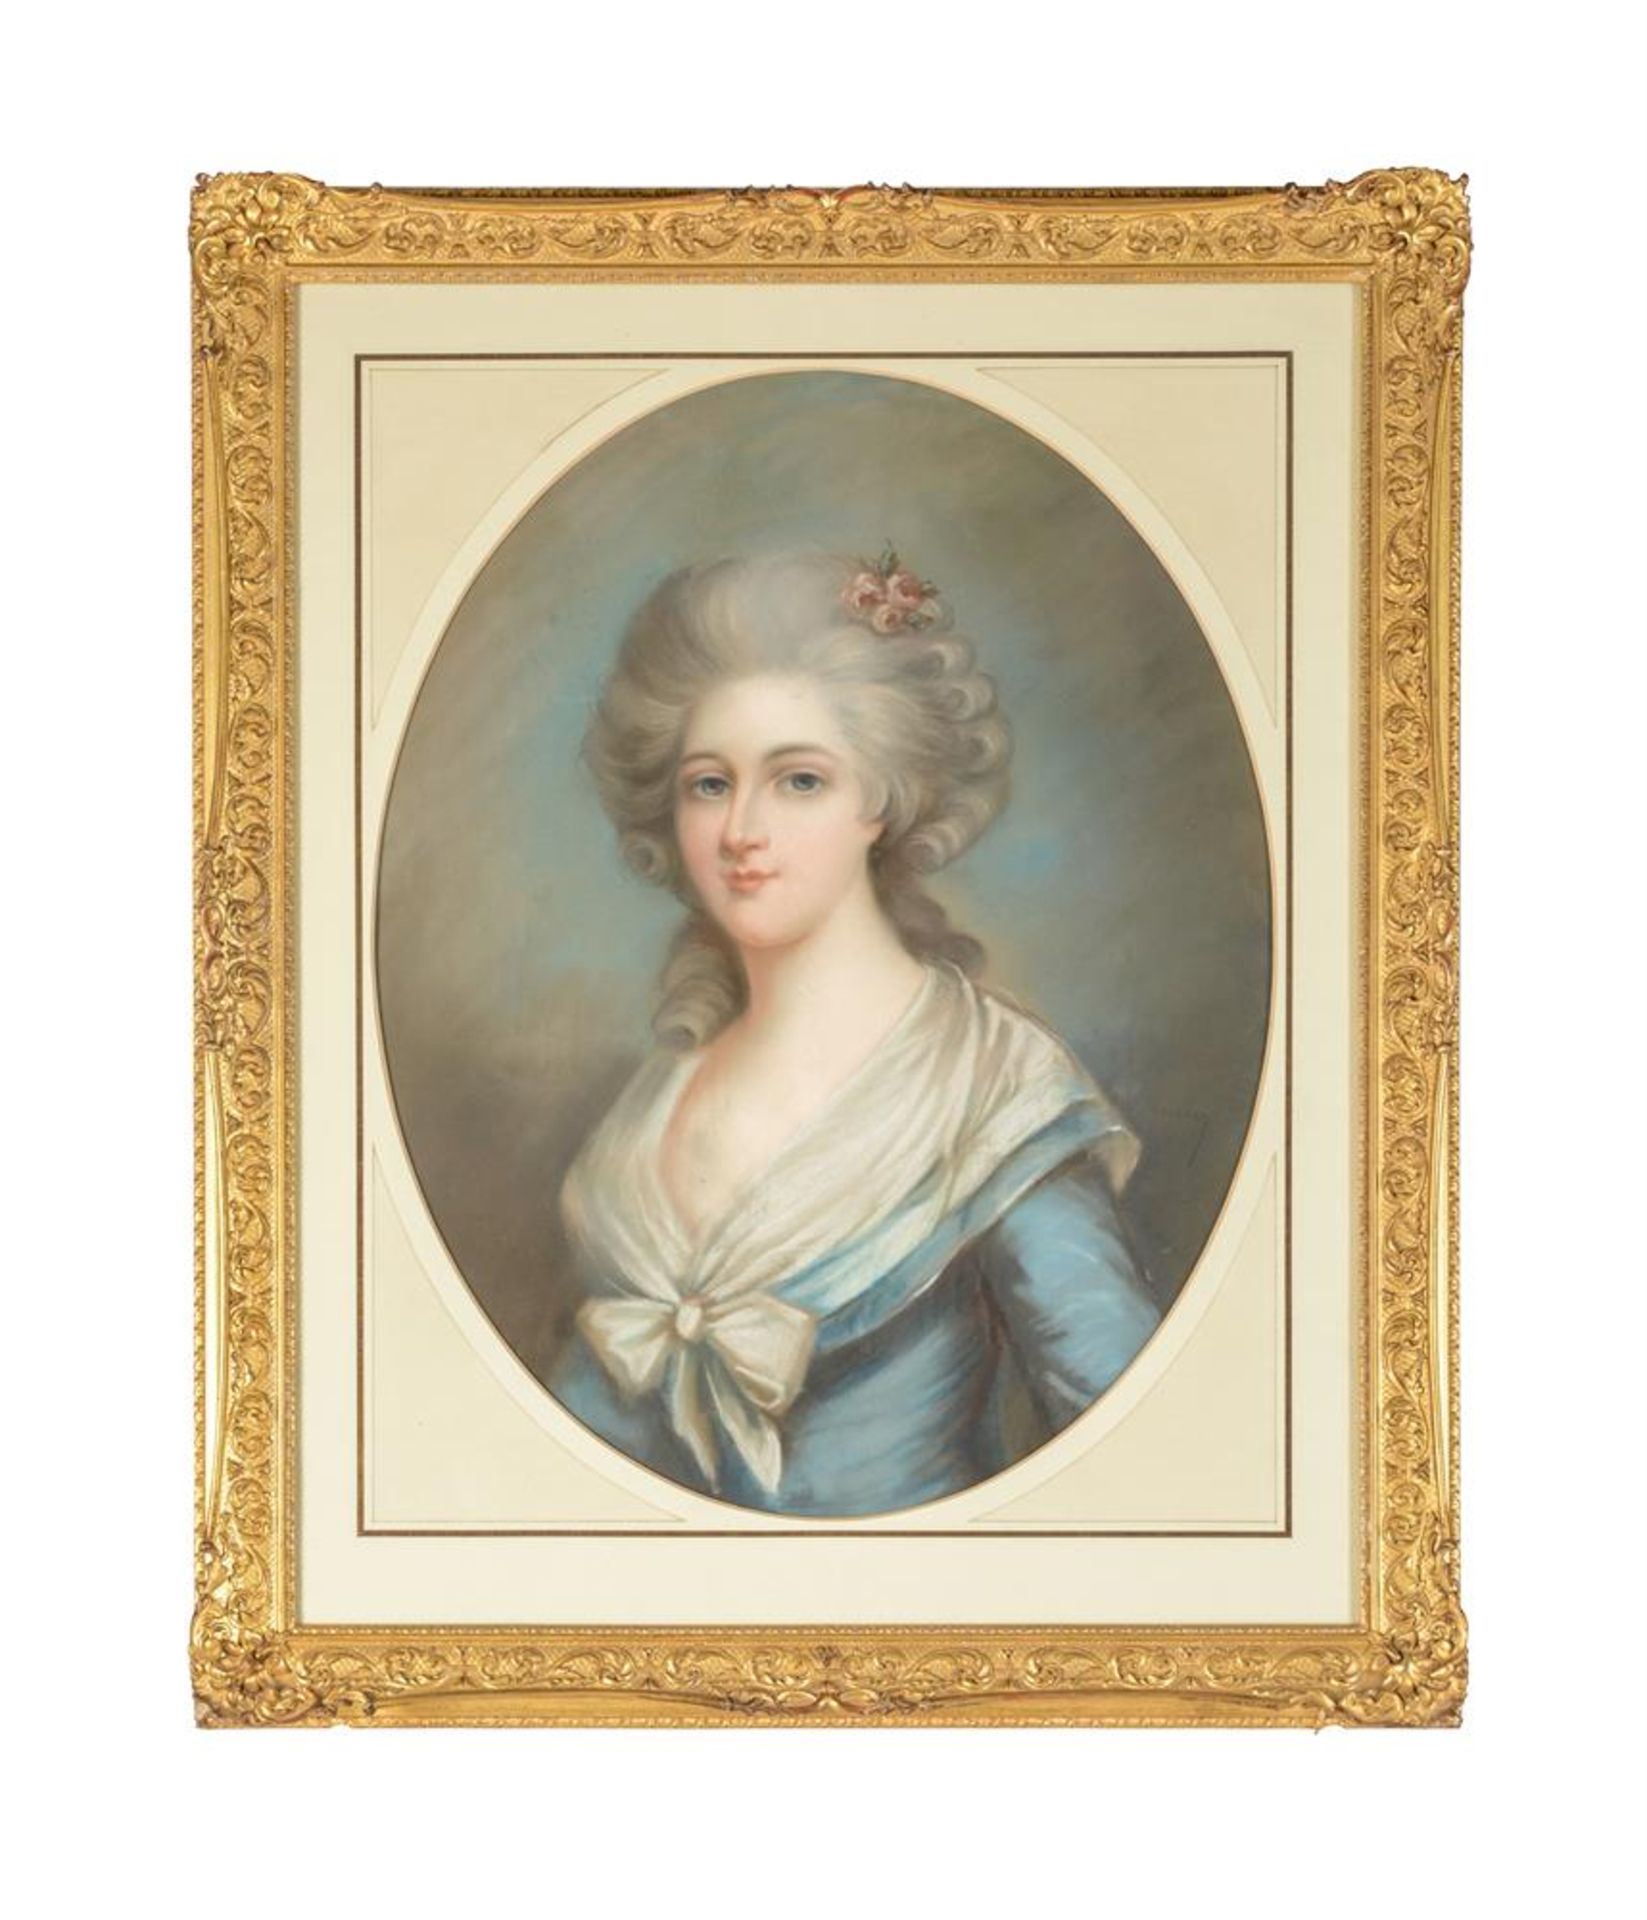 FRENCH SCHOOL (18TH CENTURY), PORTRAIT OF A LADY IN A BLUE DRESS - Image 2 of 2